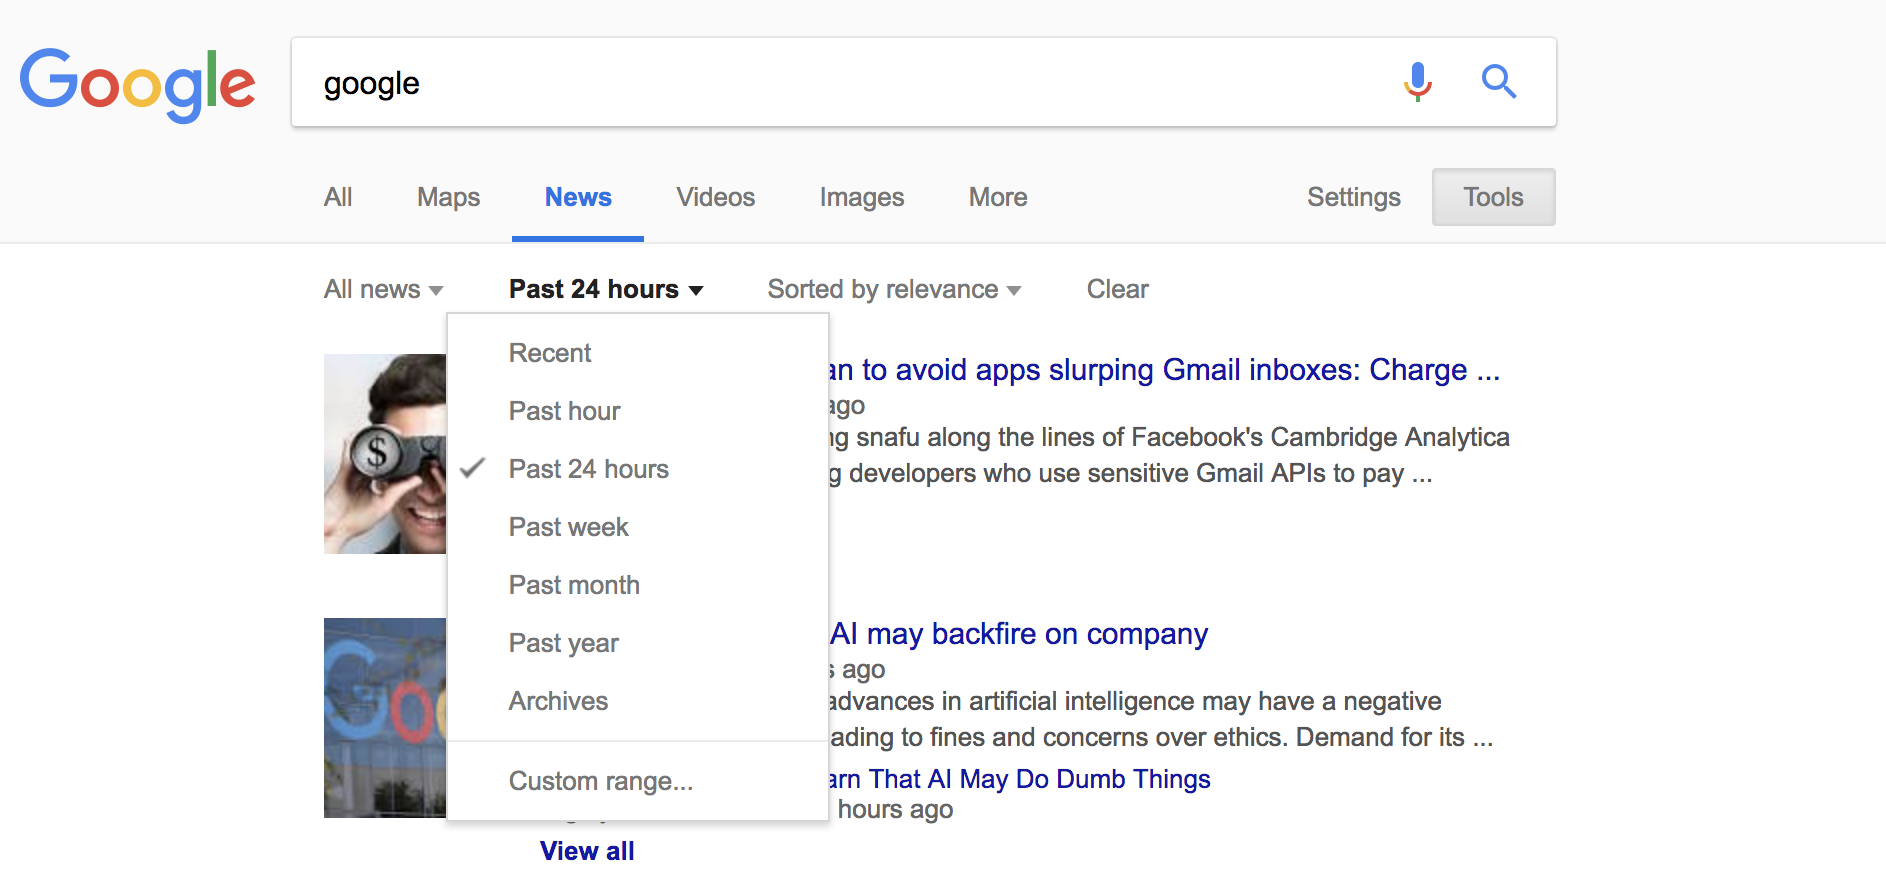 screenshot of Google News filtered by past 24 hours or past week, to be used when finding relevant content for link building